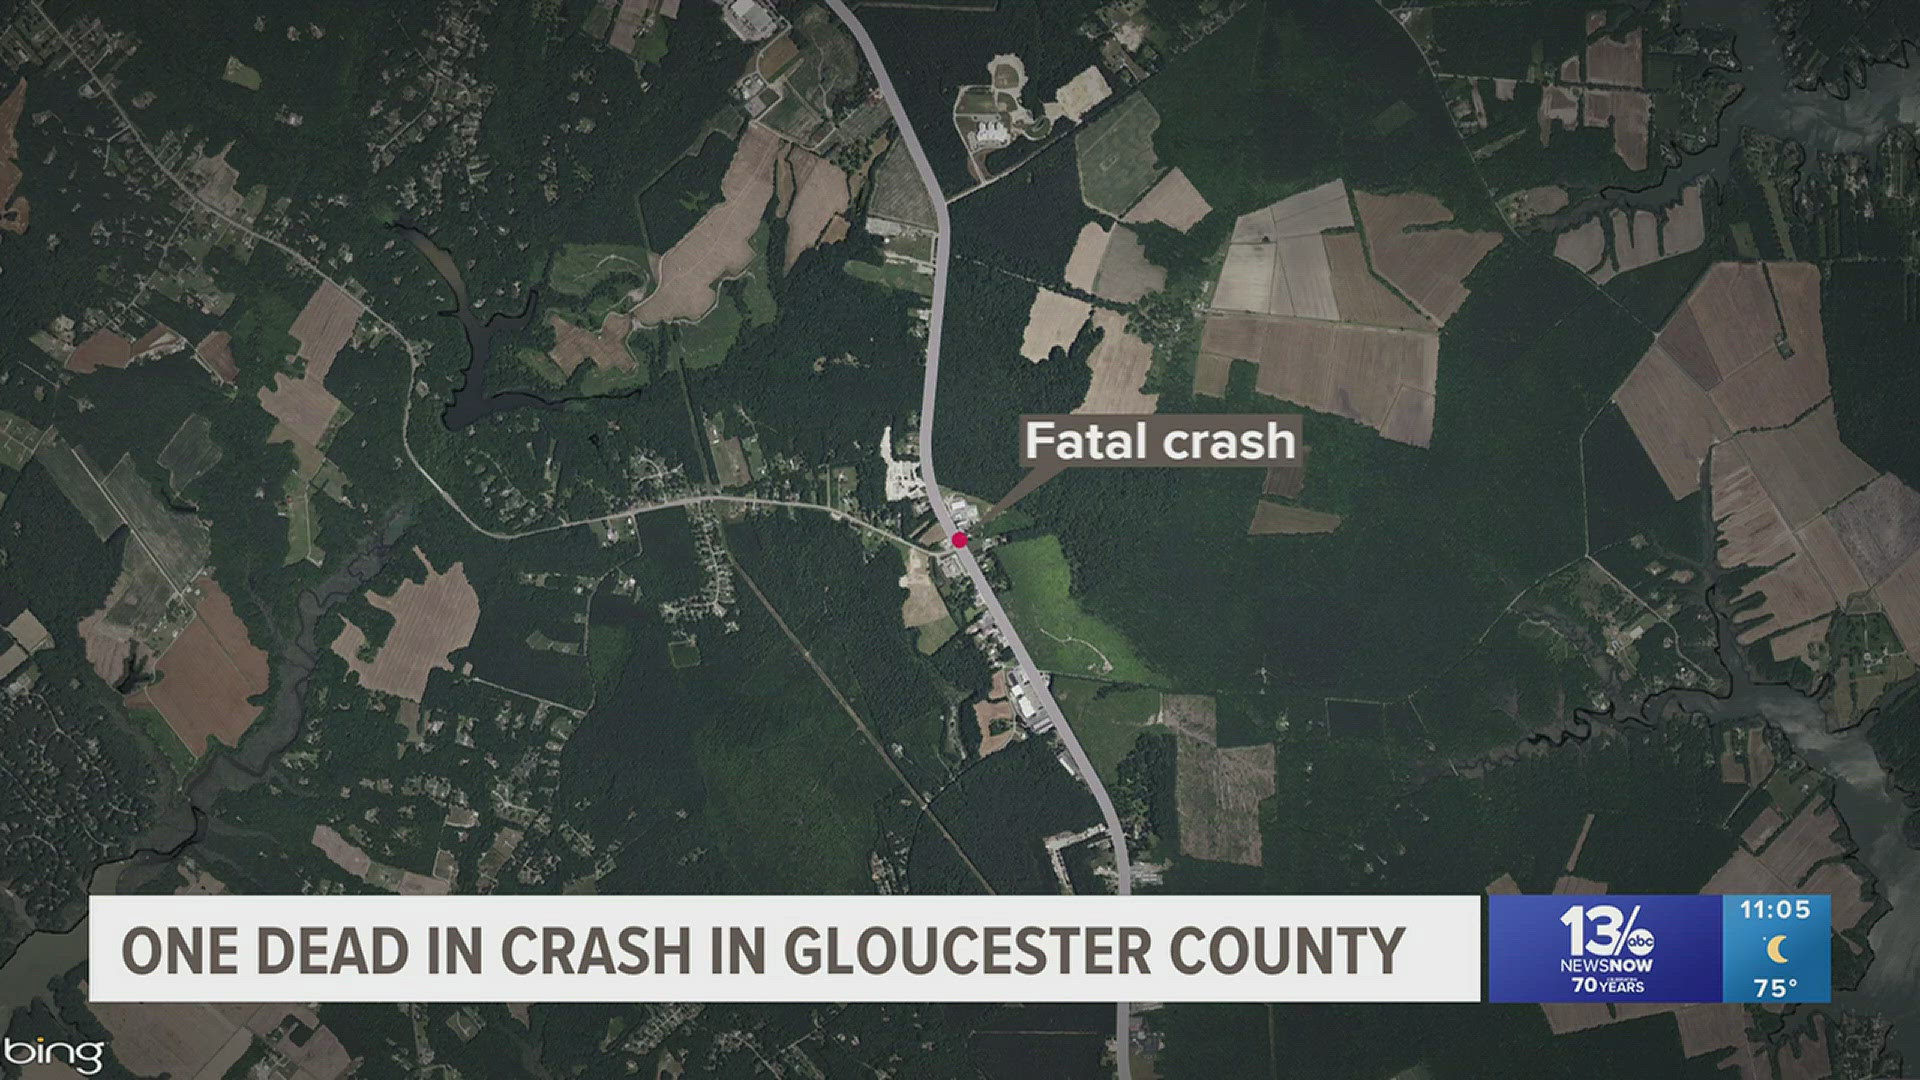 State police responded to the crash just before 5:15 p.m. The crash happened along Route 17.